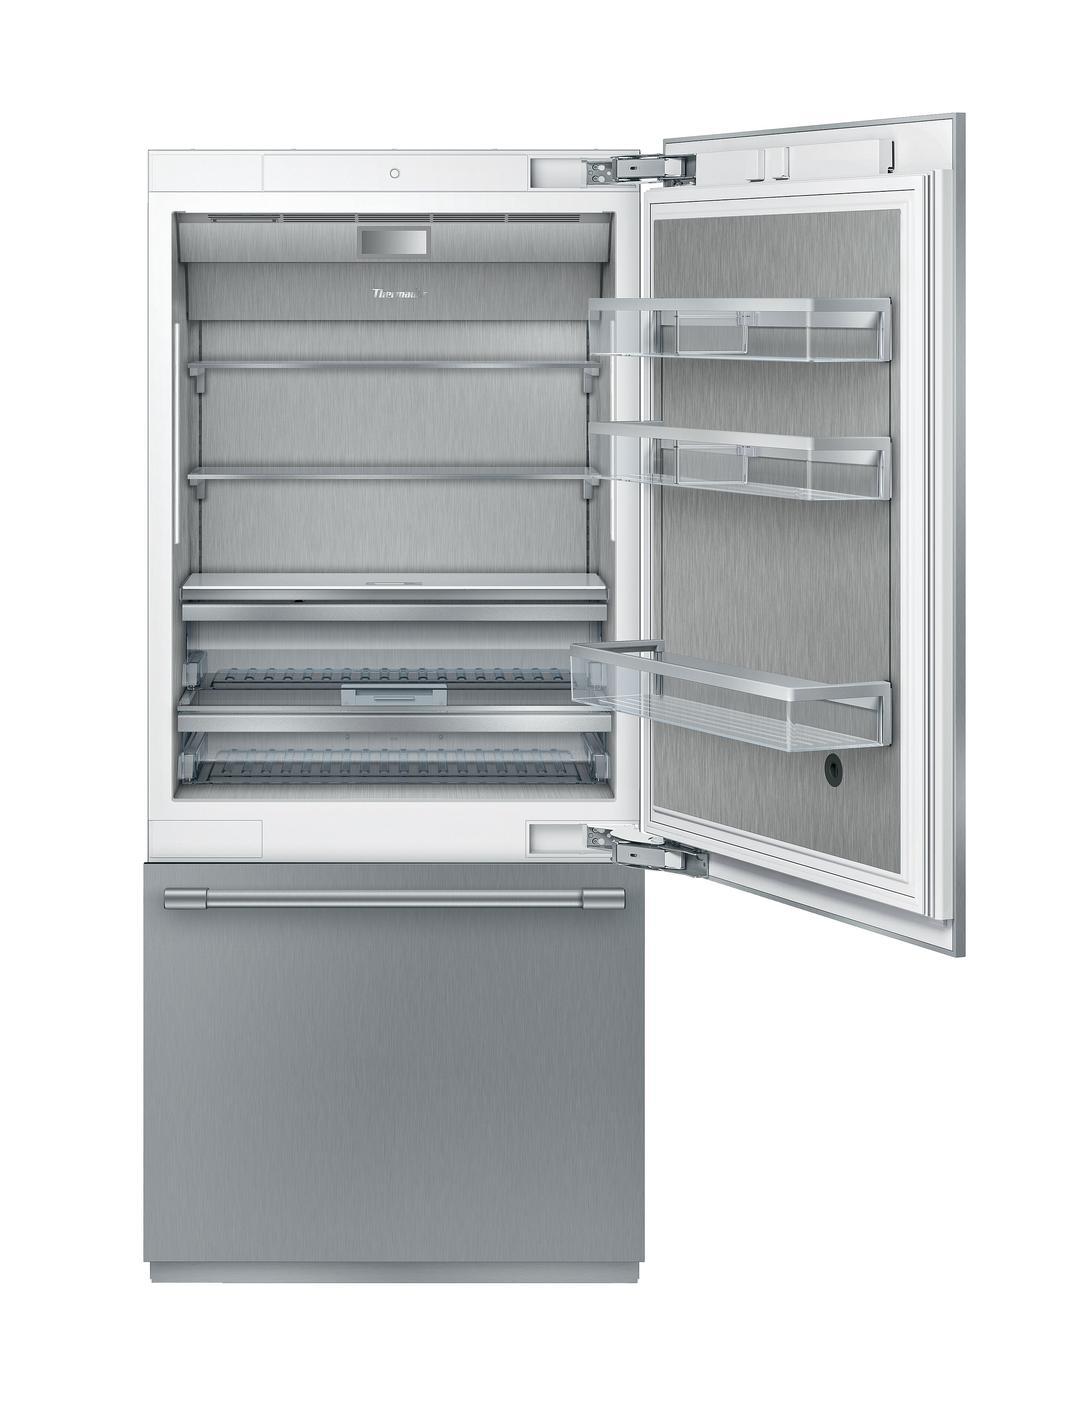 Thermador - 35.75 Inch 19.6 cu. ft Built In / Integrated Bottom Mount Refrigerator in Panel Ready - T36IB905SP